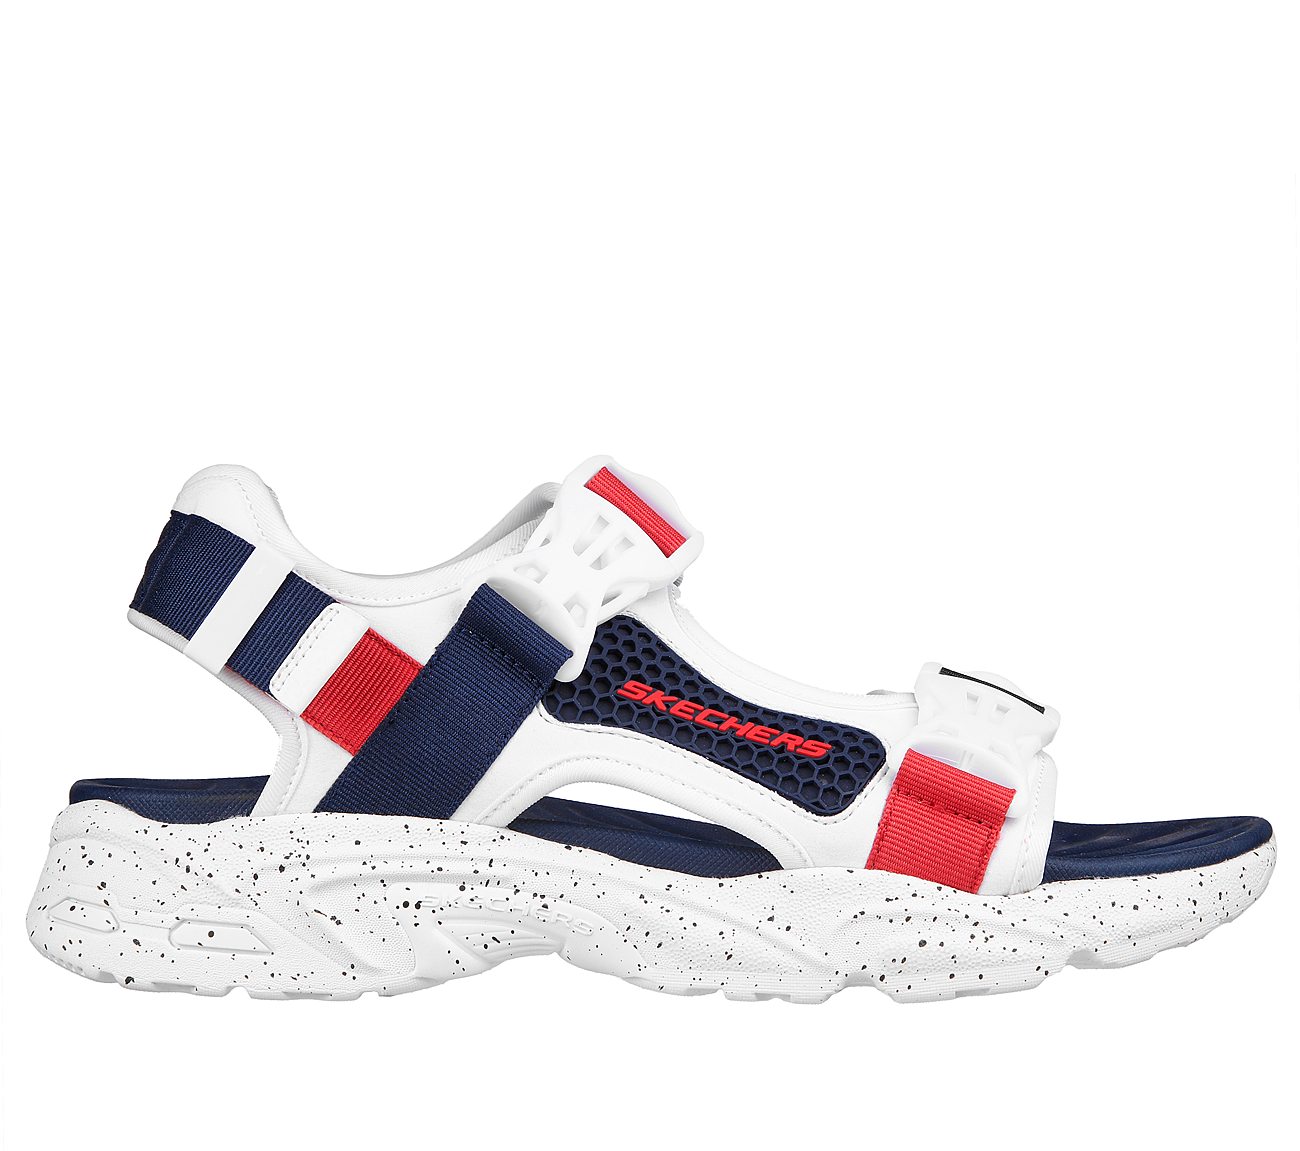 STAMINA SANDAL-STREAMER, WHITE/NAVY/RED Footwear Lateral View